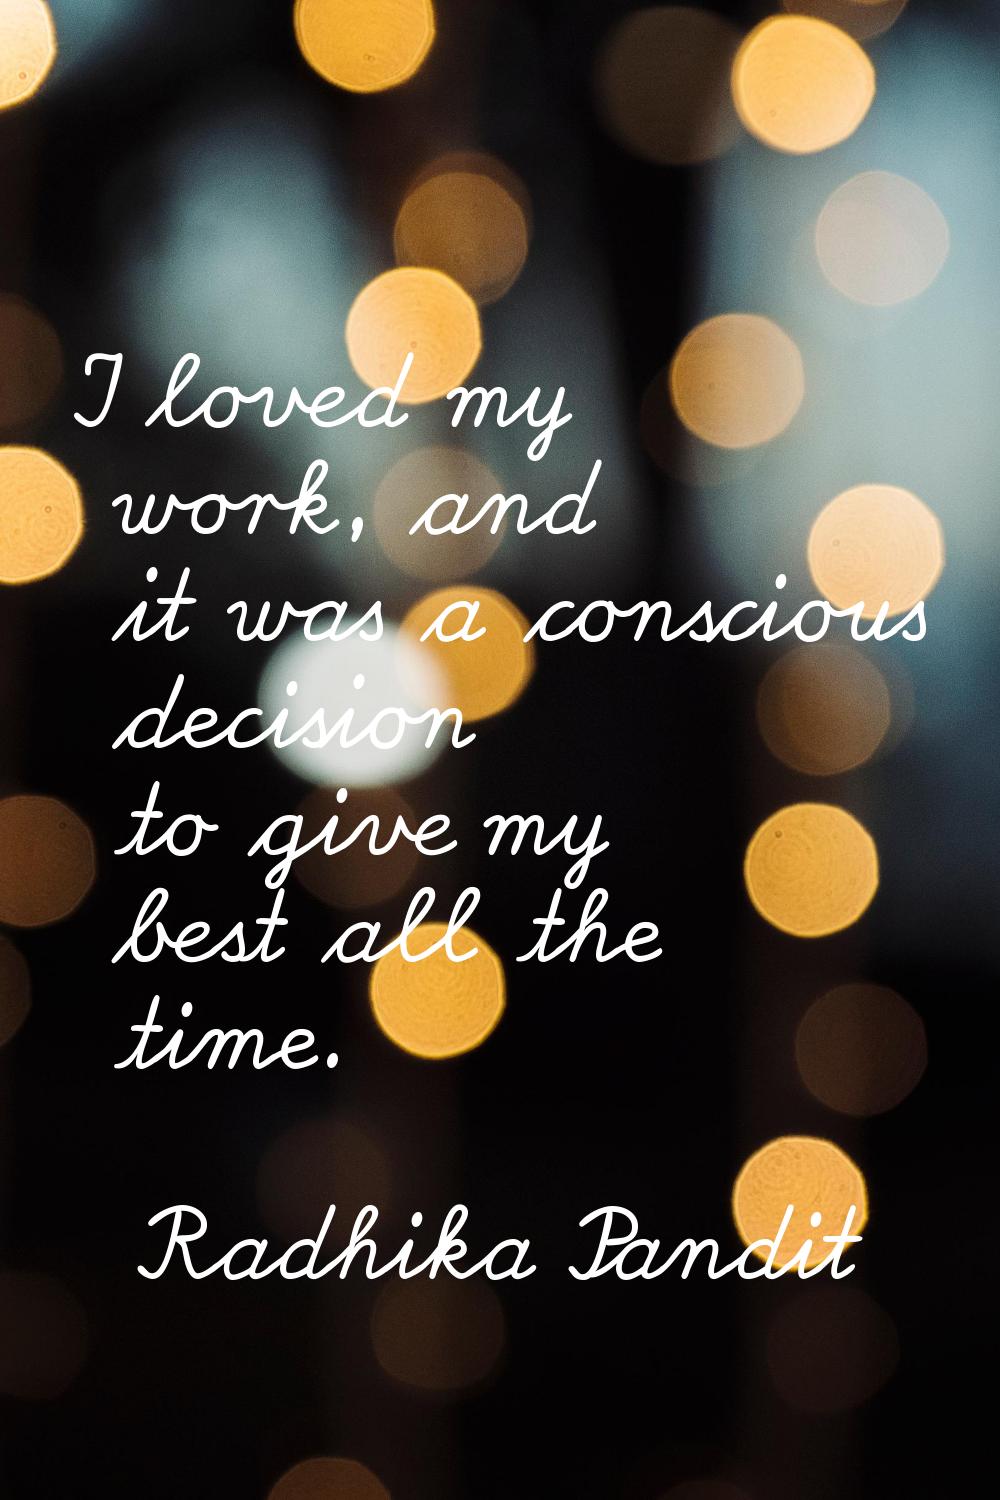 I loved my work, and it was a conscious decision to give my best all the time.